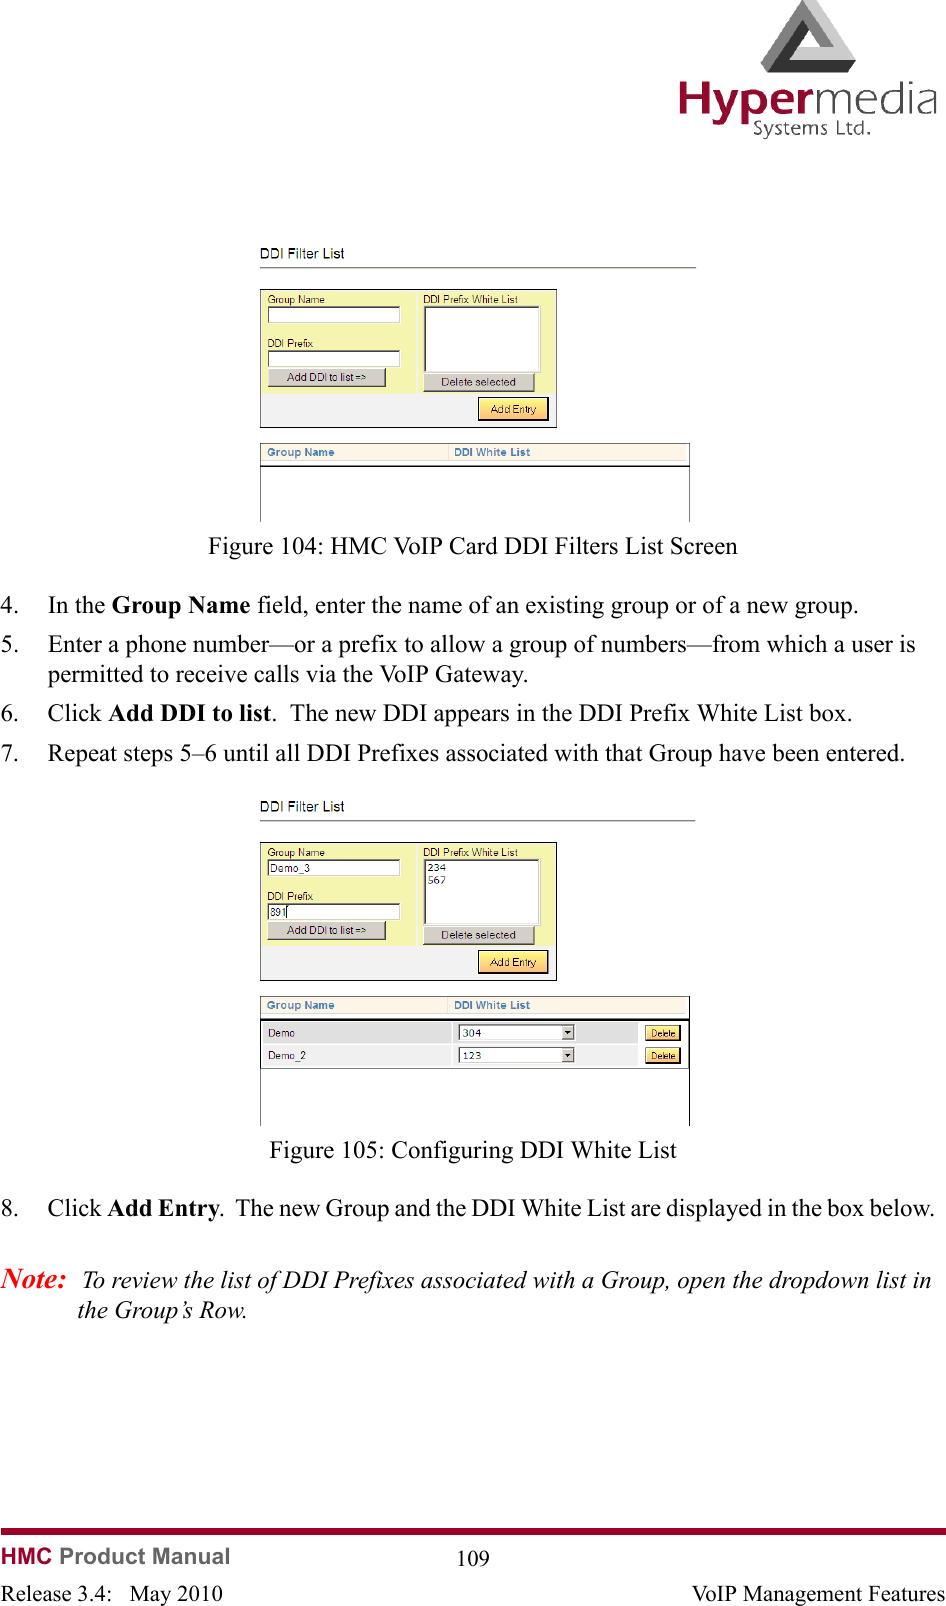 HMC Product Manual  109Release 3.4:   May 2010 VoIP Management Features              Figure 104: HMC VoIP Card DDI Filters List Screen4. In the Group Name field, enter the name of an existing group or of a new group.5. Enter a phone number—or a prefix to allow a group of numbers—from which a user is permitted to receive calls via the VoIP Gateway.6. Click Add DDI to list.  The new DDI appears in the DDI Prefix White List box.7. Repeat steps 5–6 until all DDI Prefixes associated with that Group have been entered.              Figure 105: Configuring DDI White List8. Click Add Entry.  The new Group and the DDI White List are displayed in the box below.  Note:  To review the list of DDI Prefixes associated with a Group, open the dropdown list in the Group’s Row.